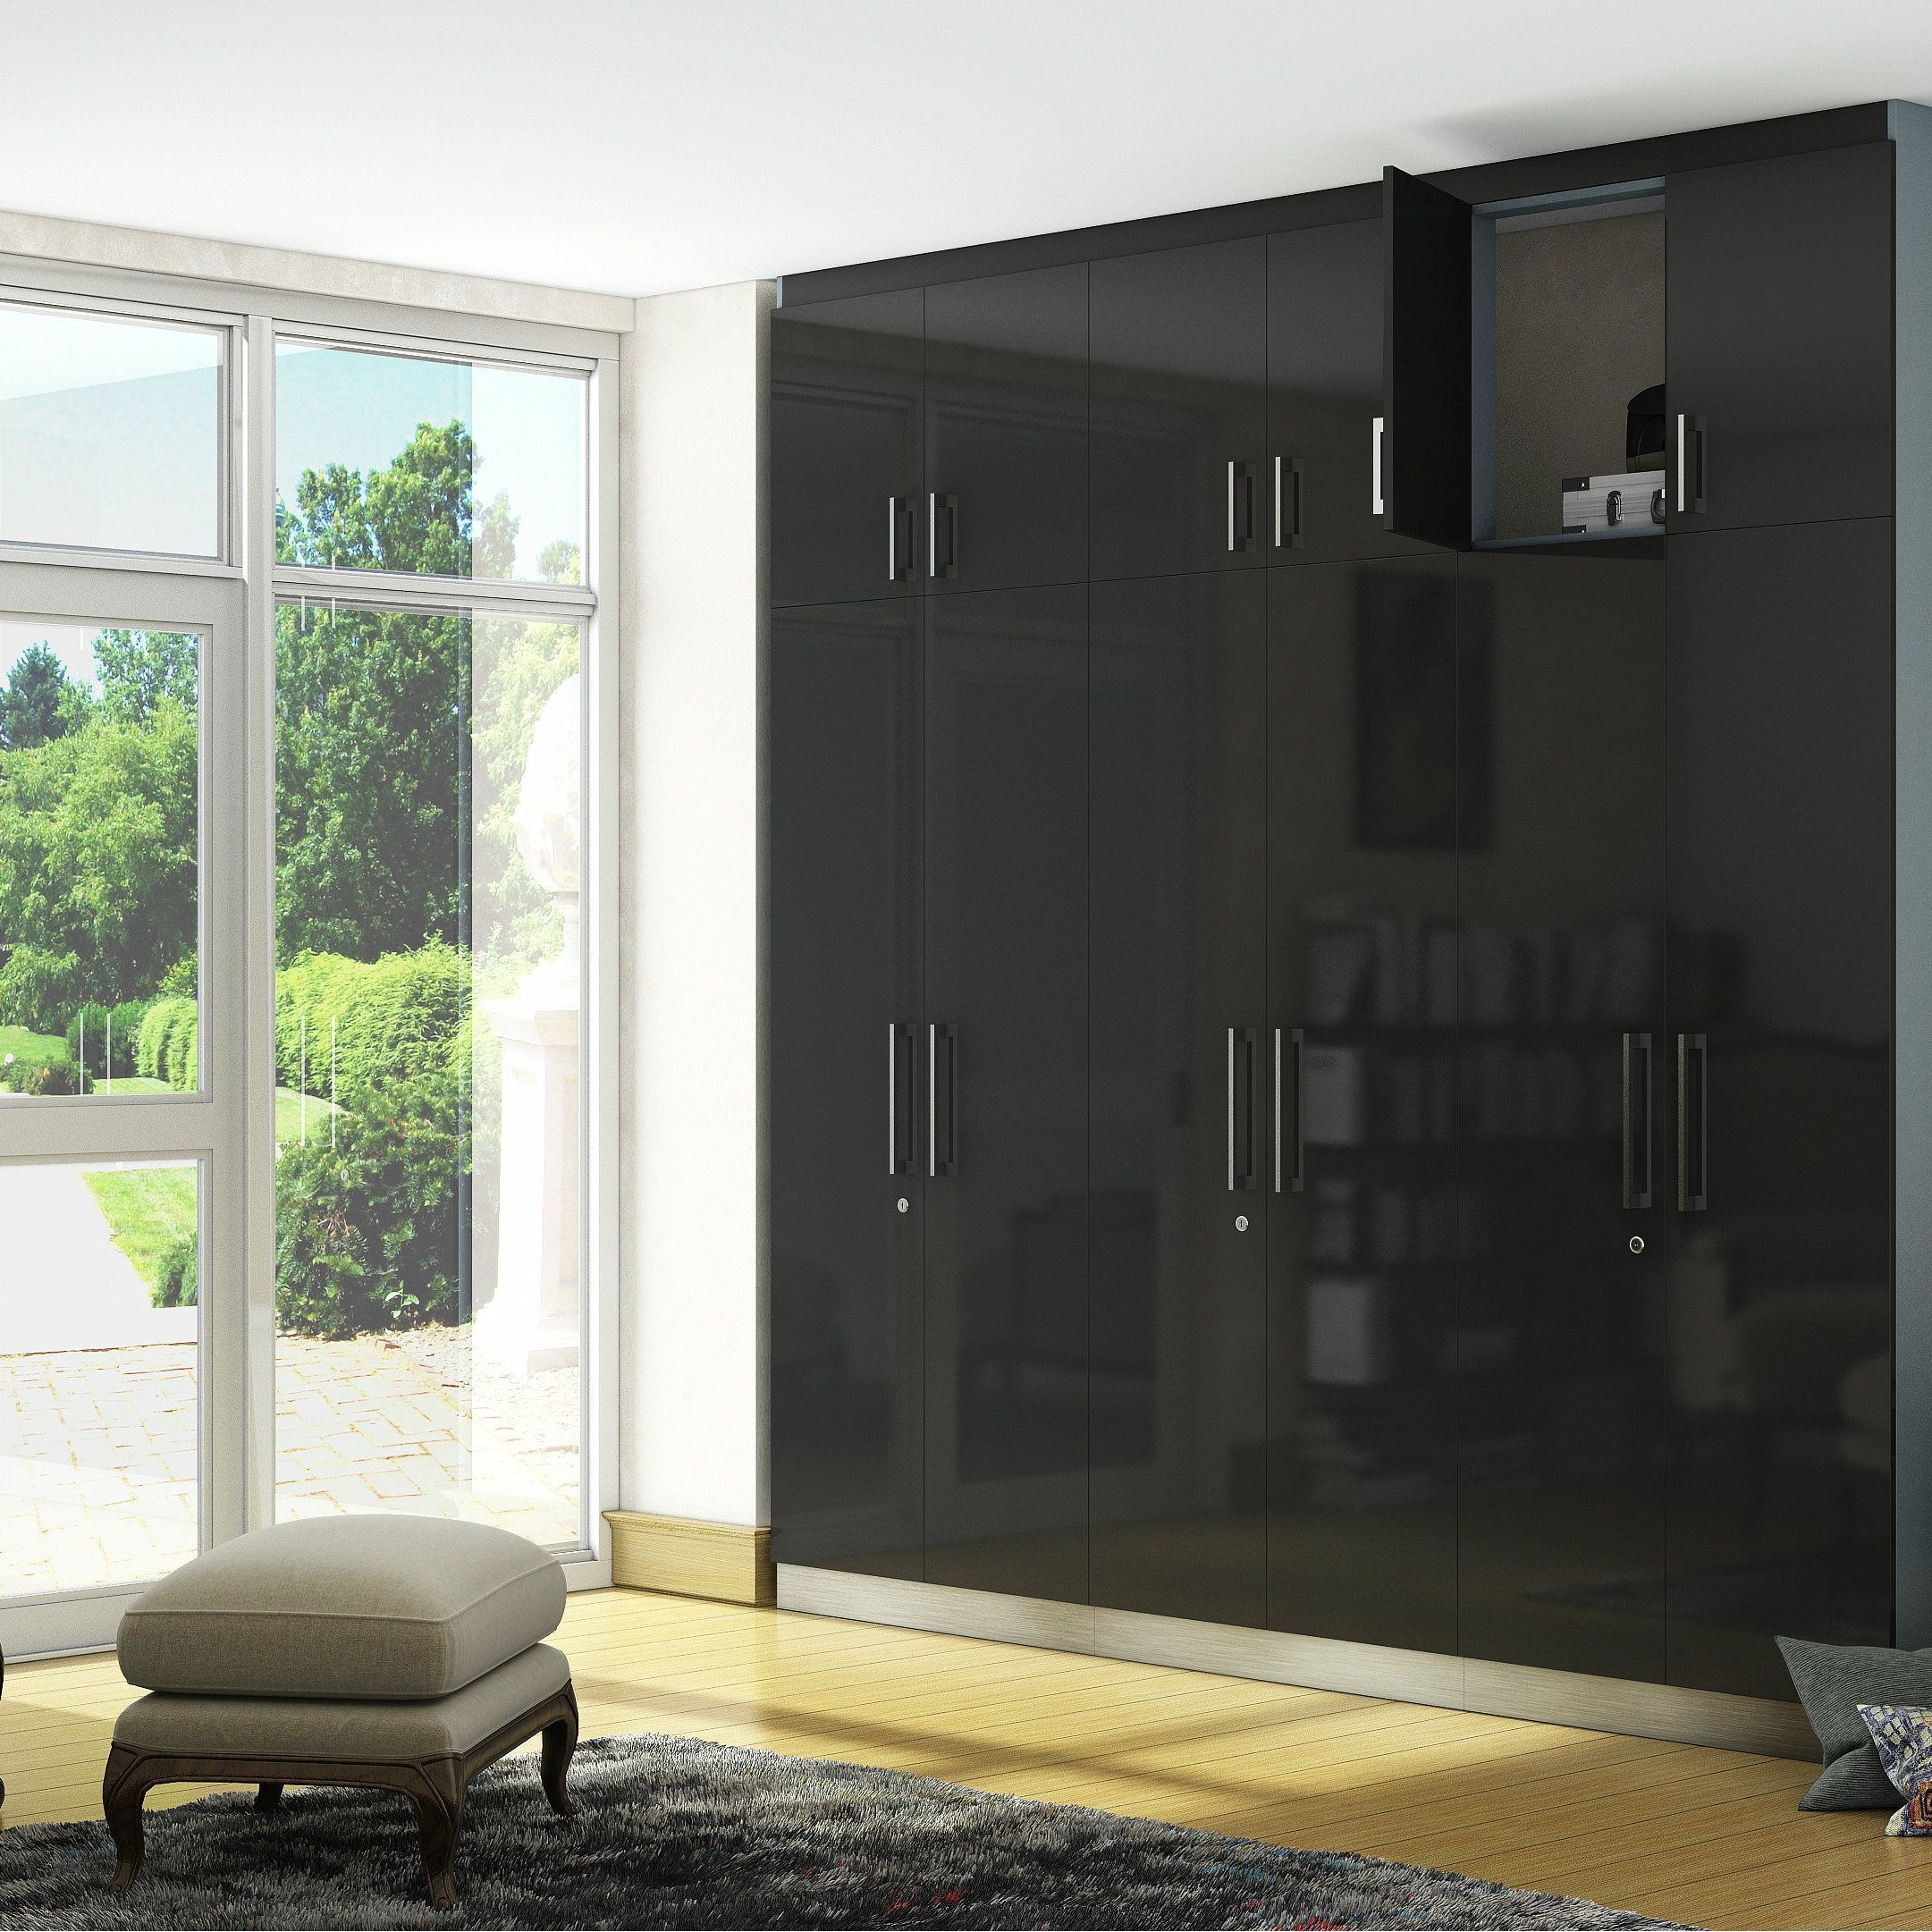 A Glossy Black Wardrobe That Is Every Bit As Impressive And Functional |  Wardrobe Design, Furniture Design, Grey Wardrobe Within Black Shiny Wardrobes (View 2 of 20)